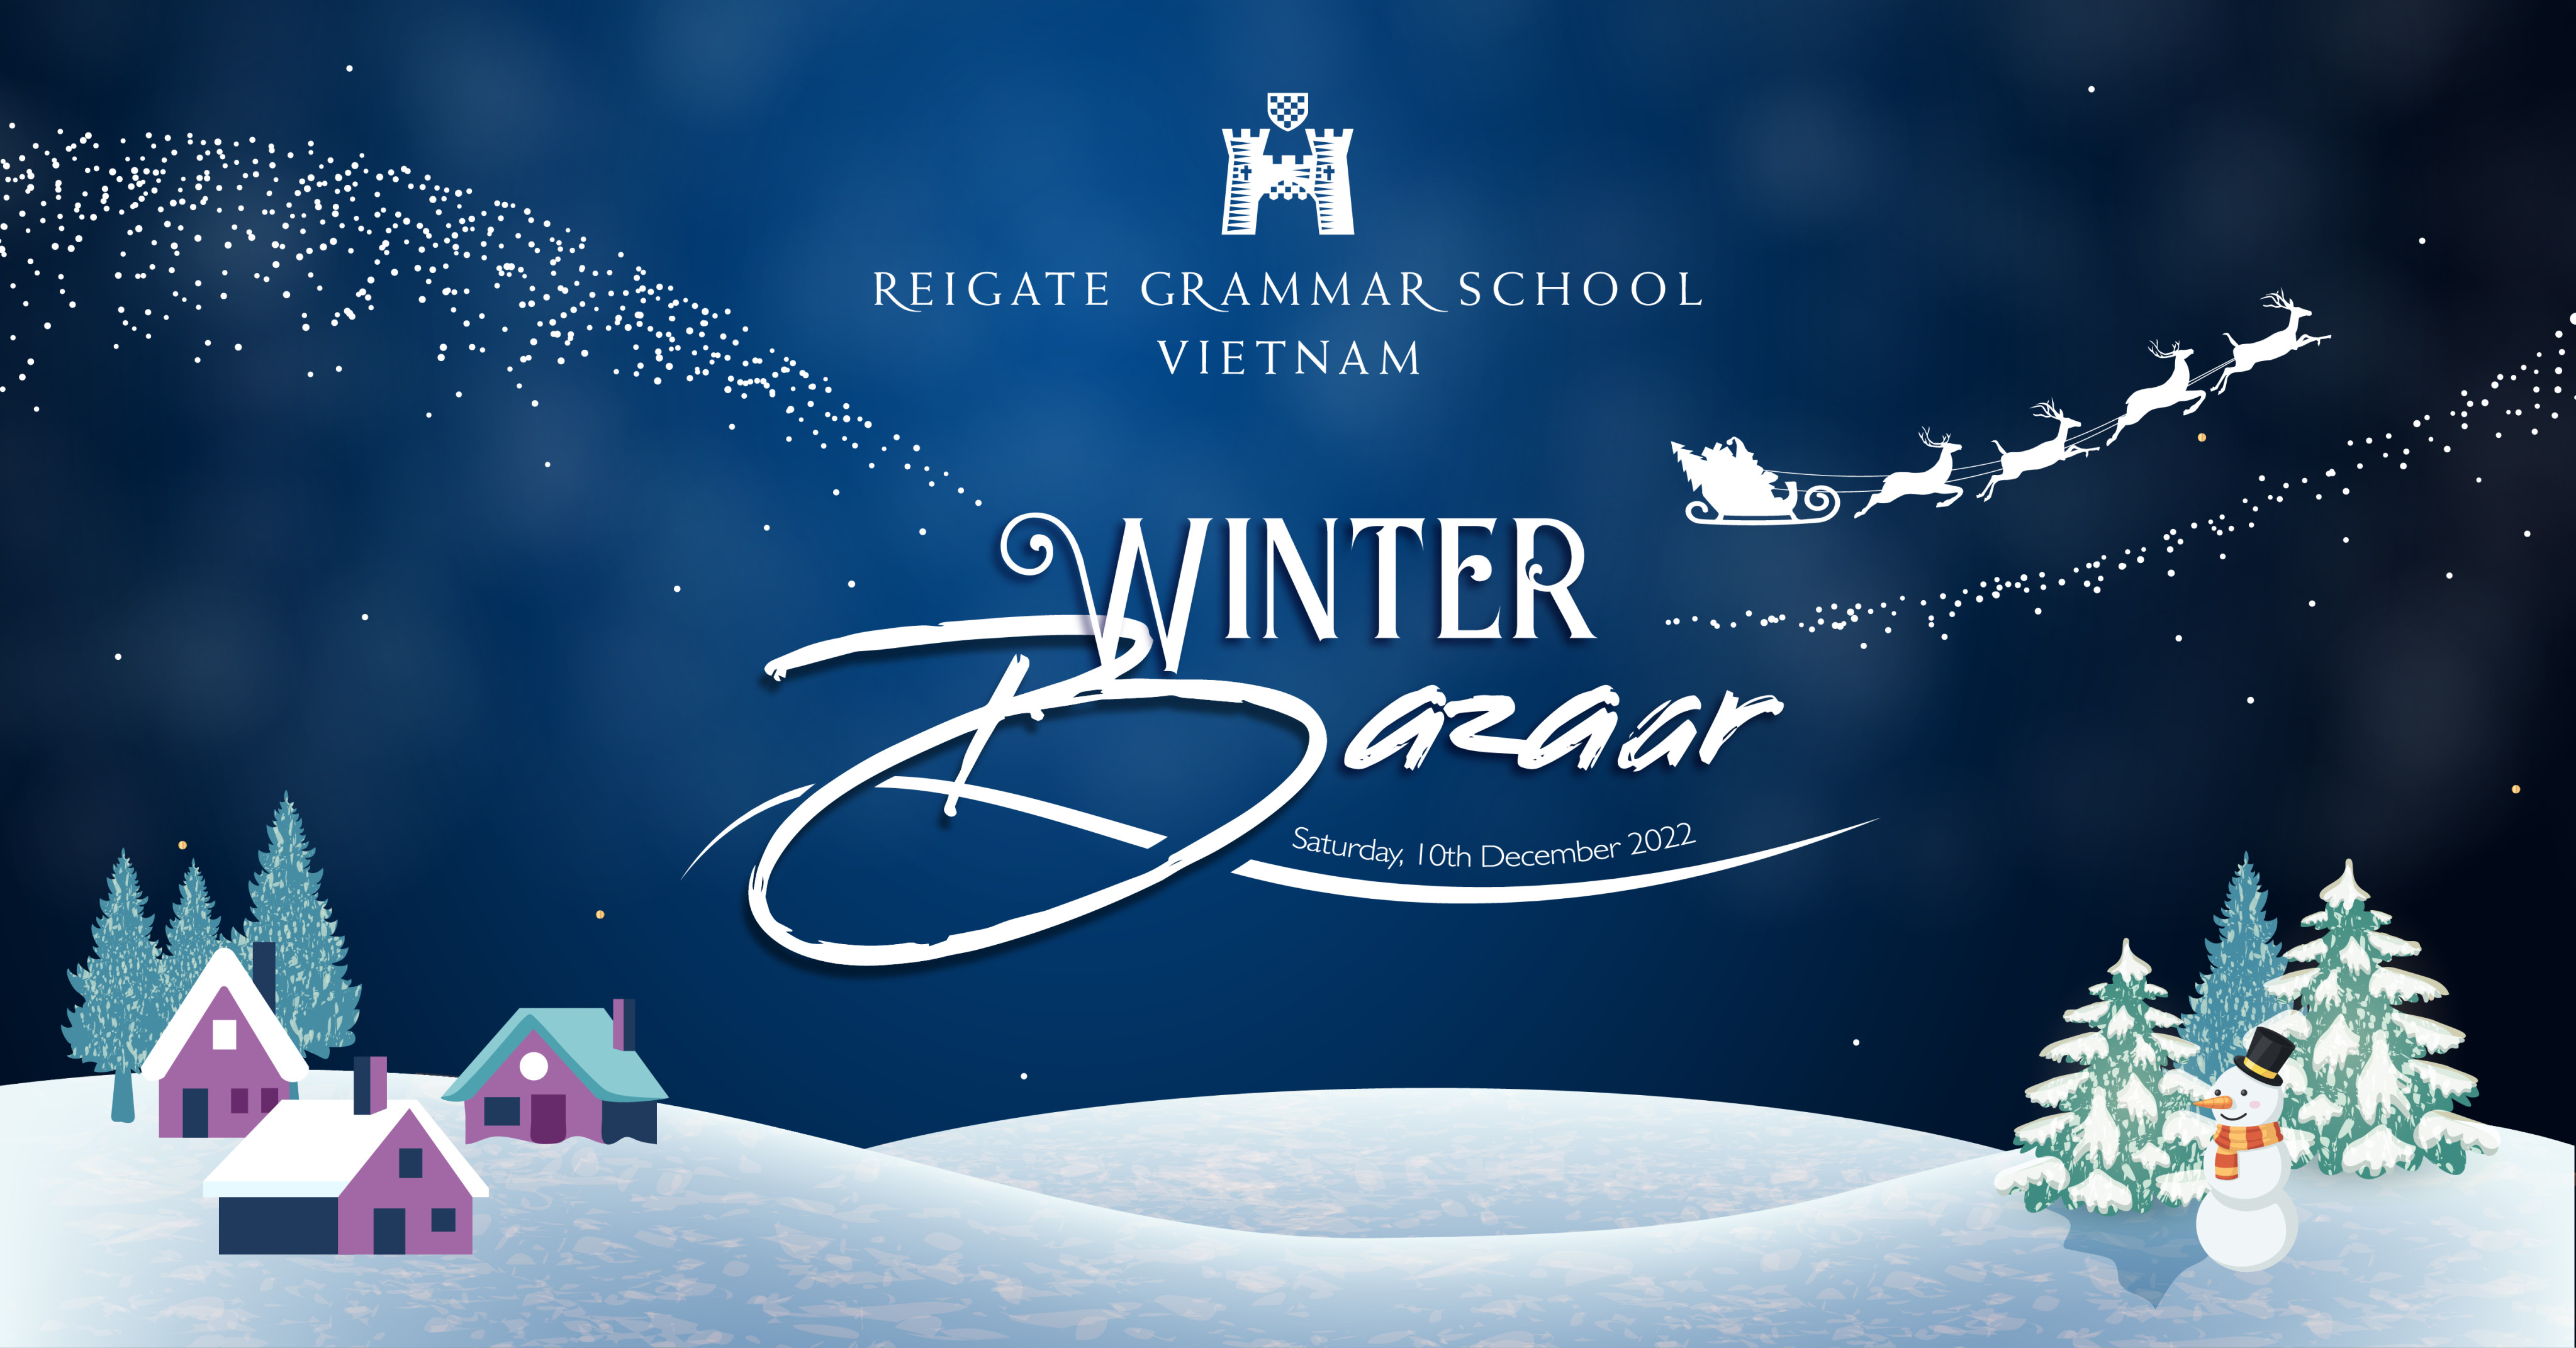 Save the date! The Winter Bazaar is nearly here!